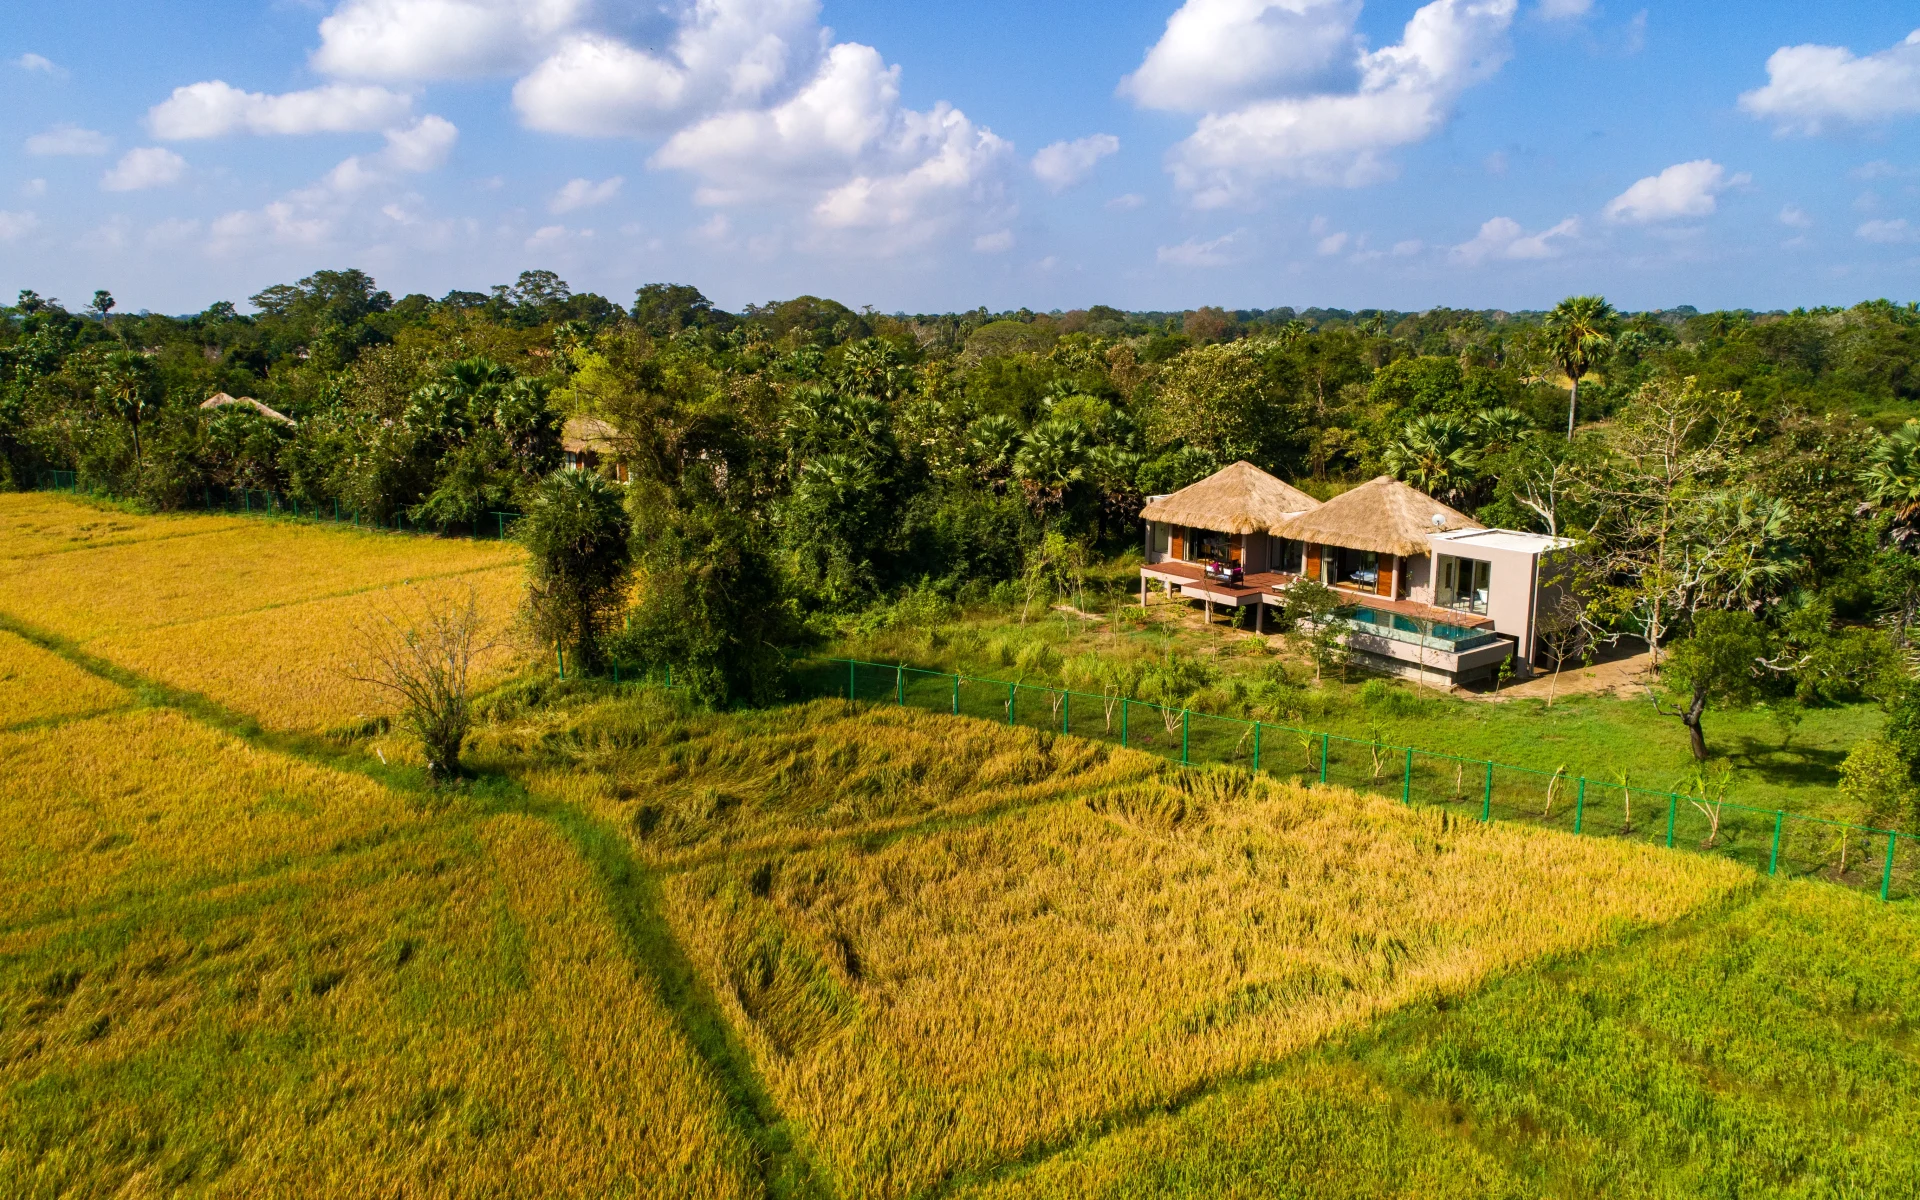 Ulagalla Resort on-looks a vast scene of the Tea Country's lush paddy fields and is surrounded by forest.